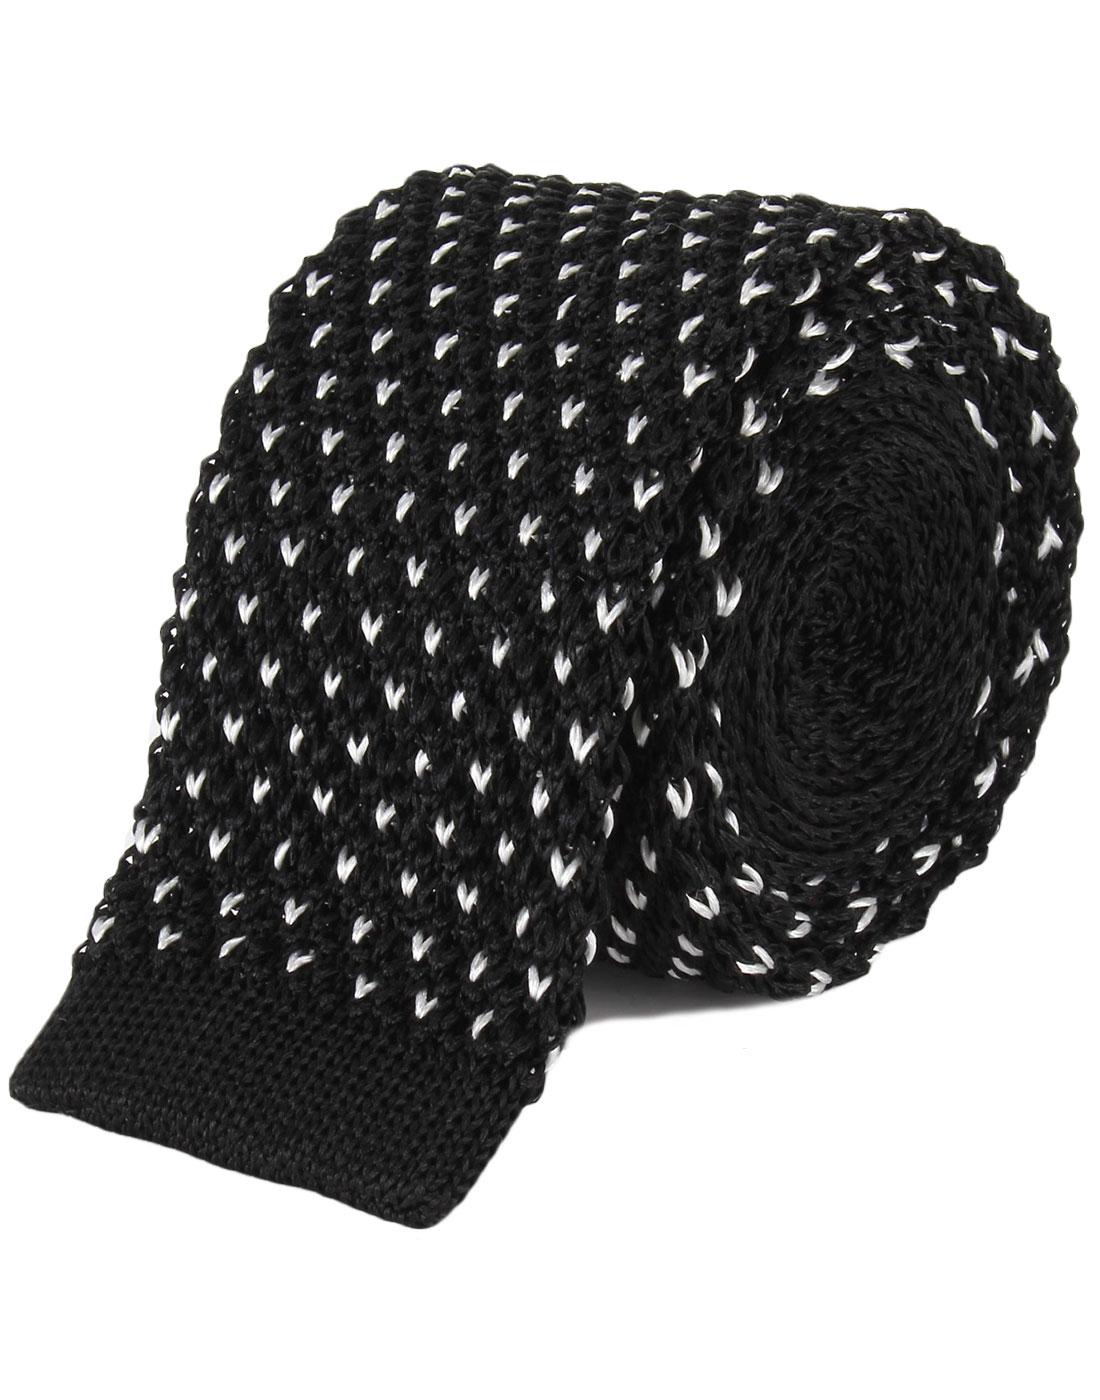 TOOTAL Retro Mod Knitted Dot Silk Tie in Black